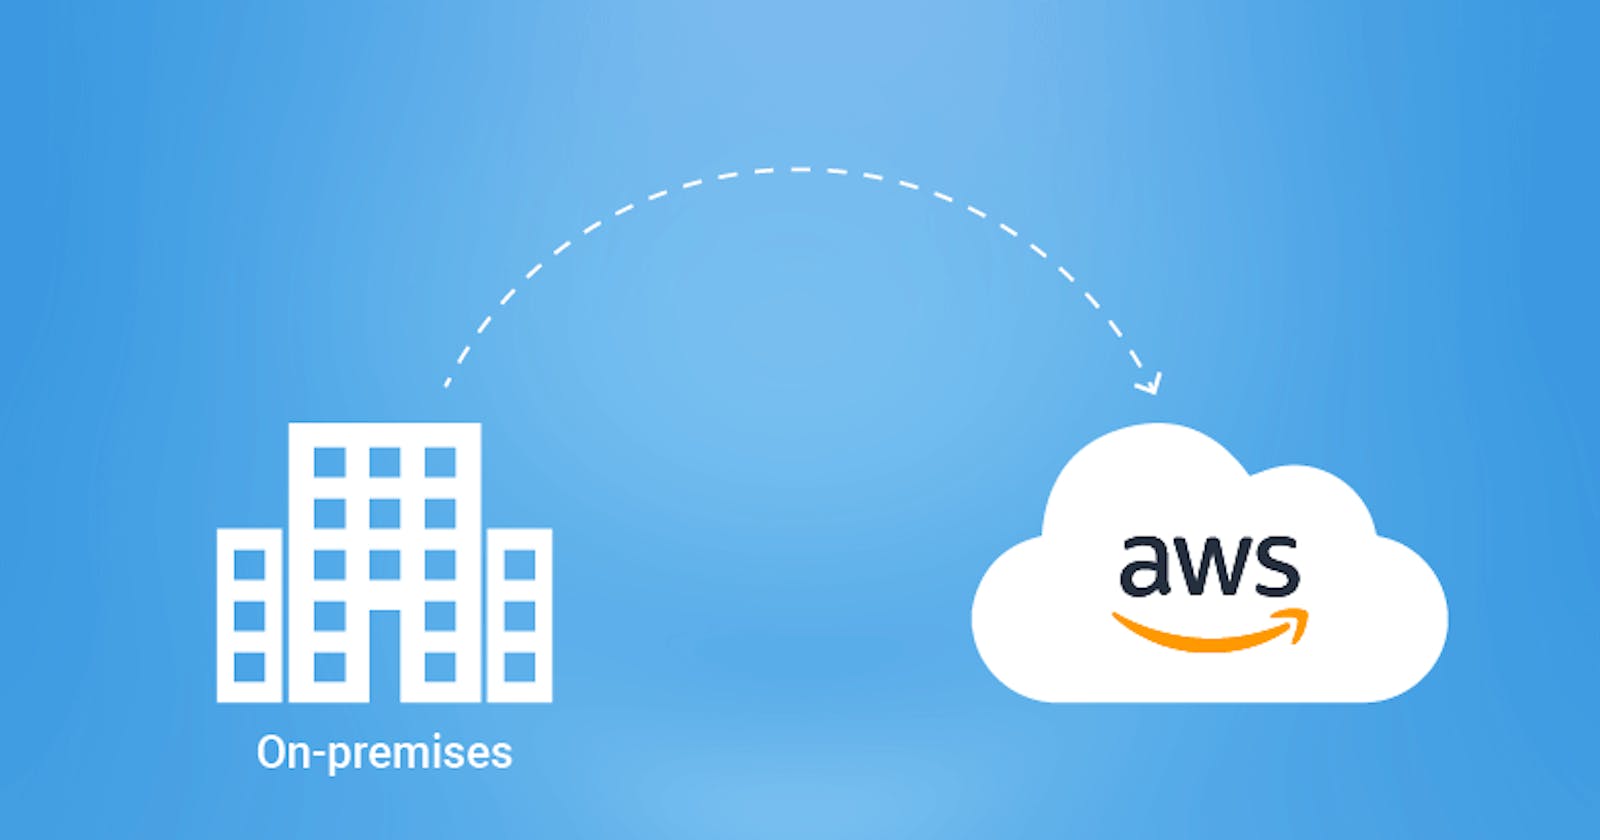 On-premises to AWS cloud migration: Step-by-step guide